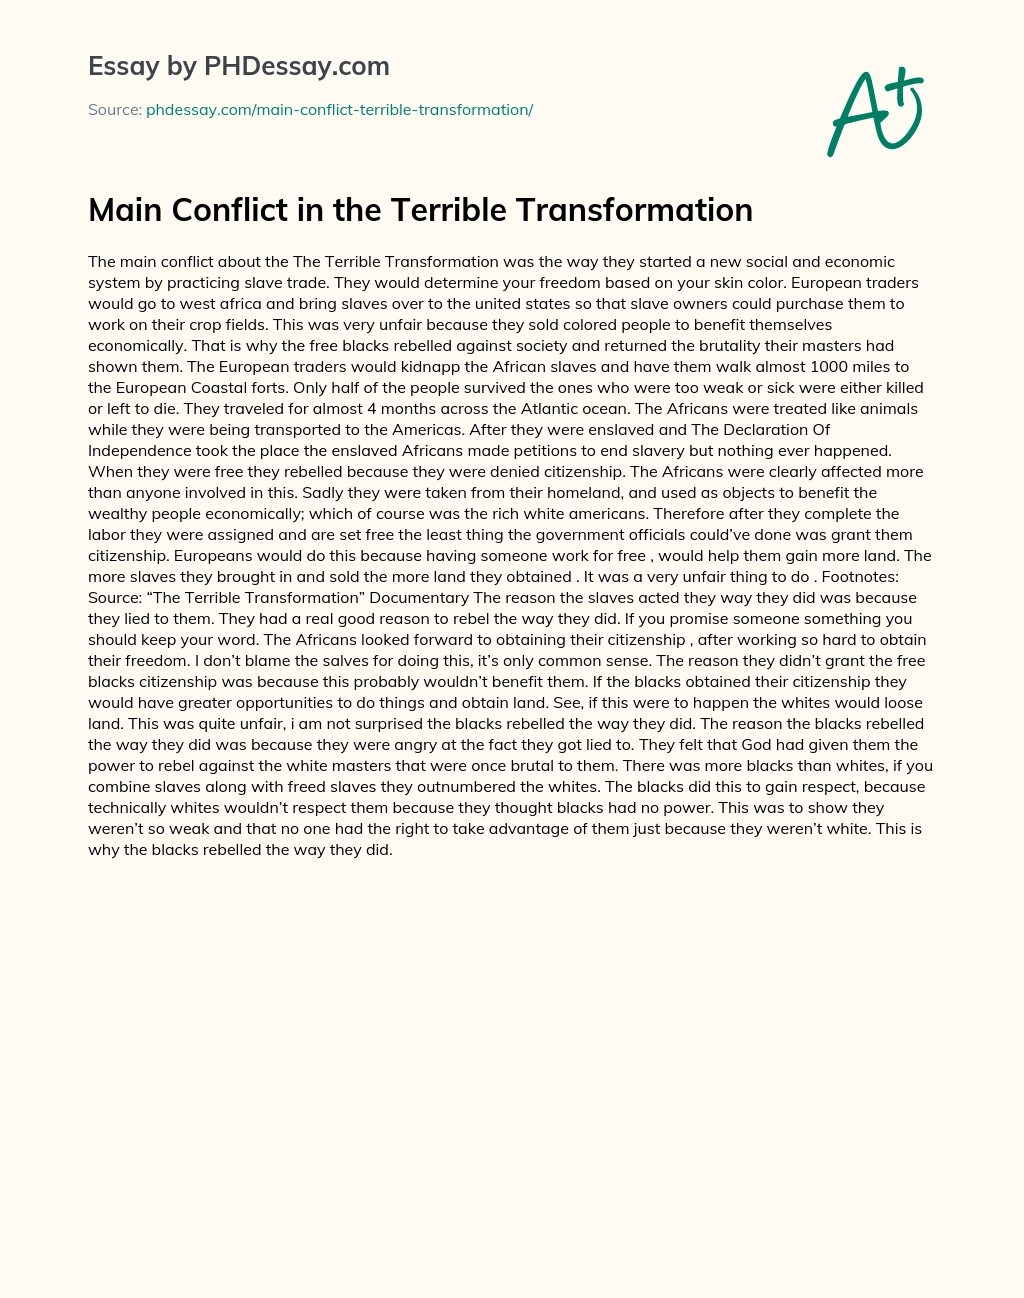 Main Conflict in the Terrible Transformation essay